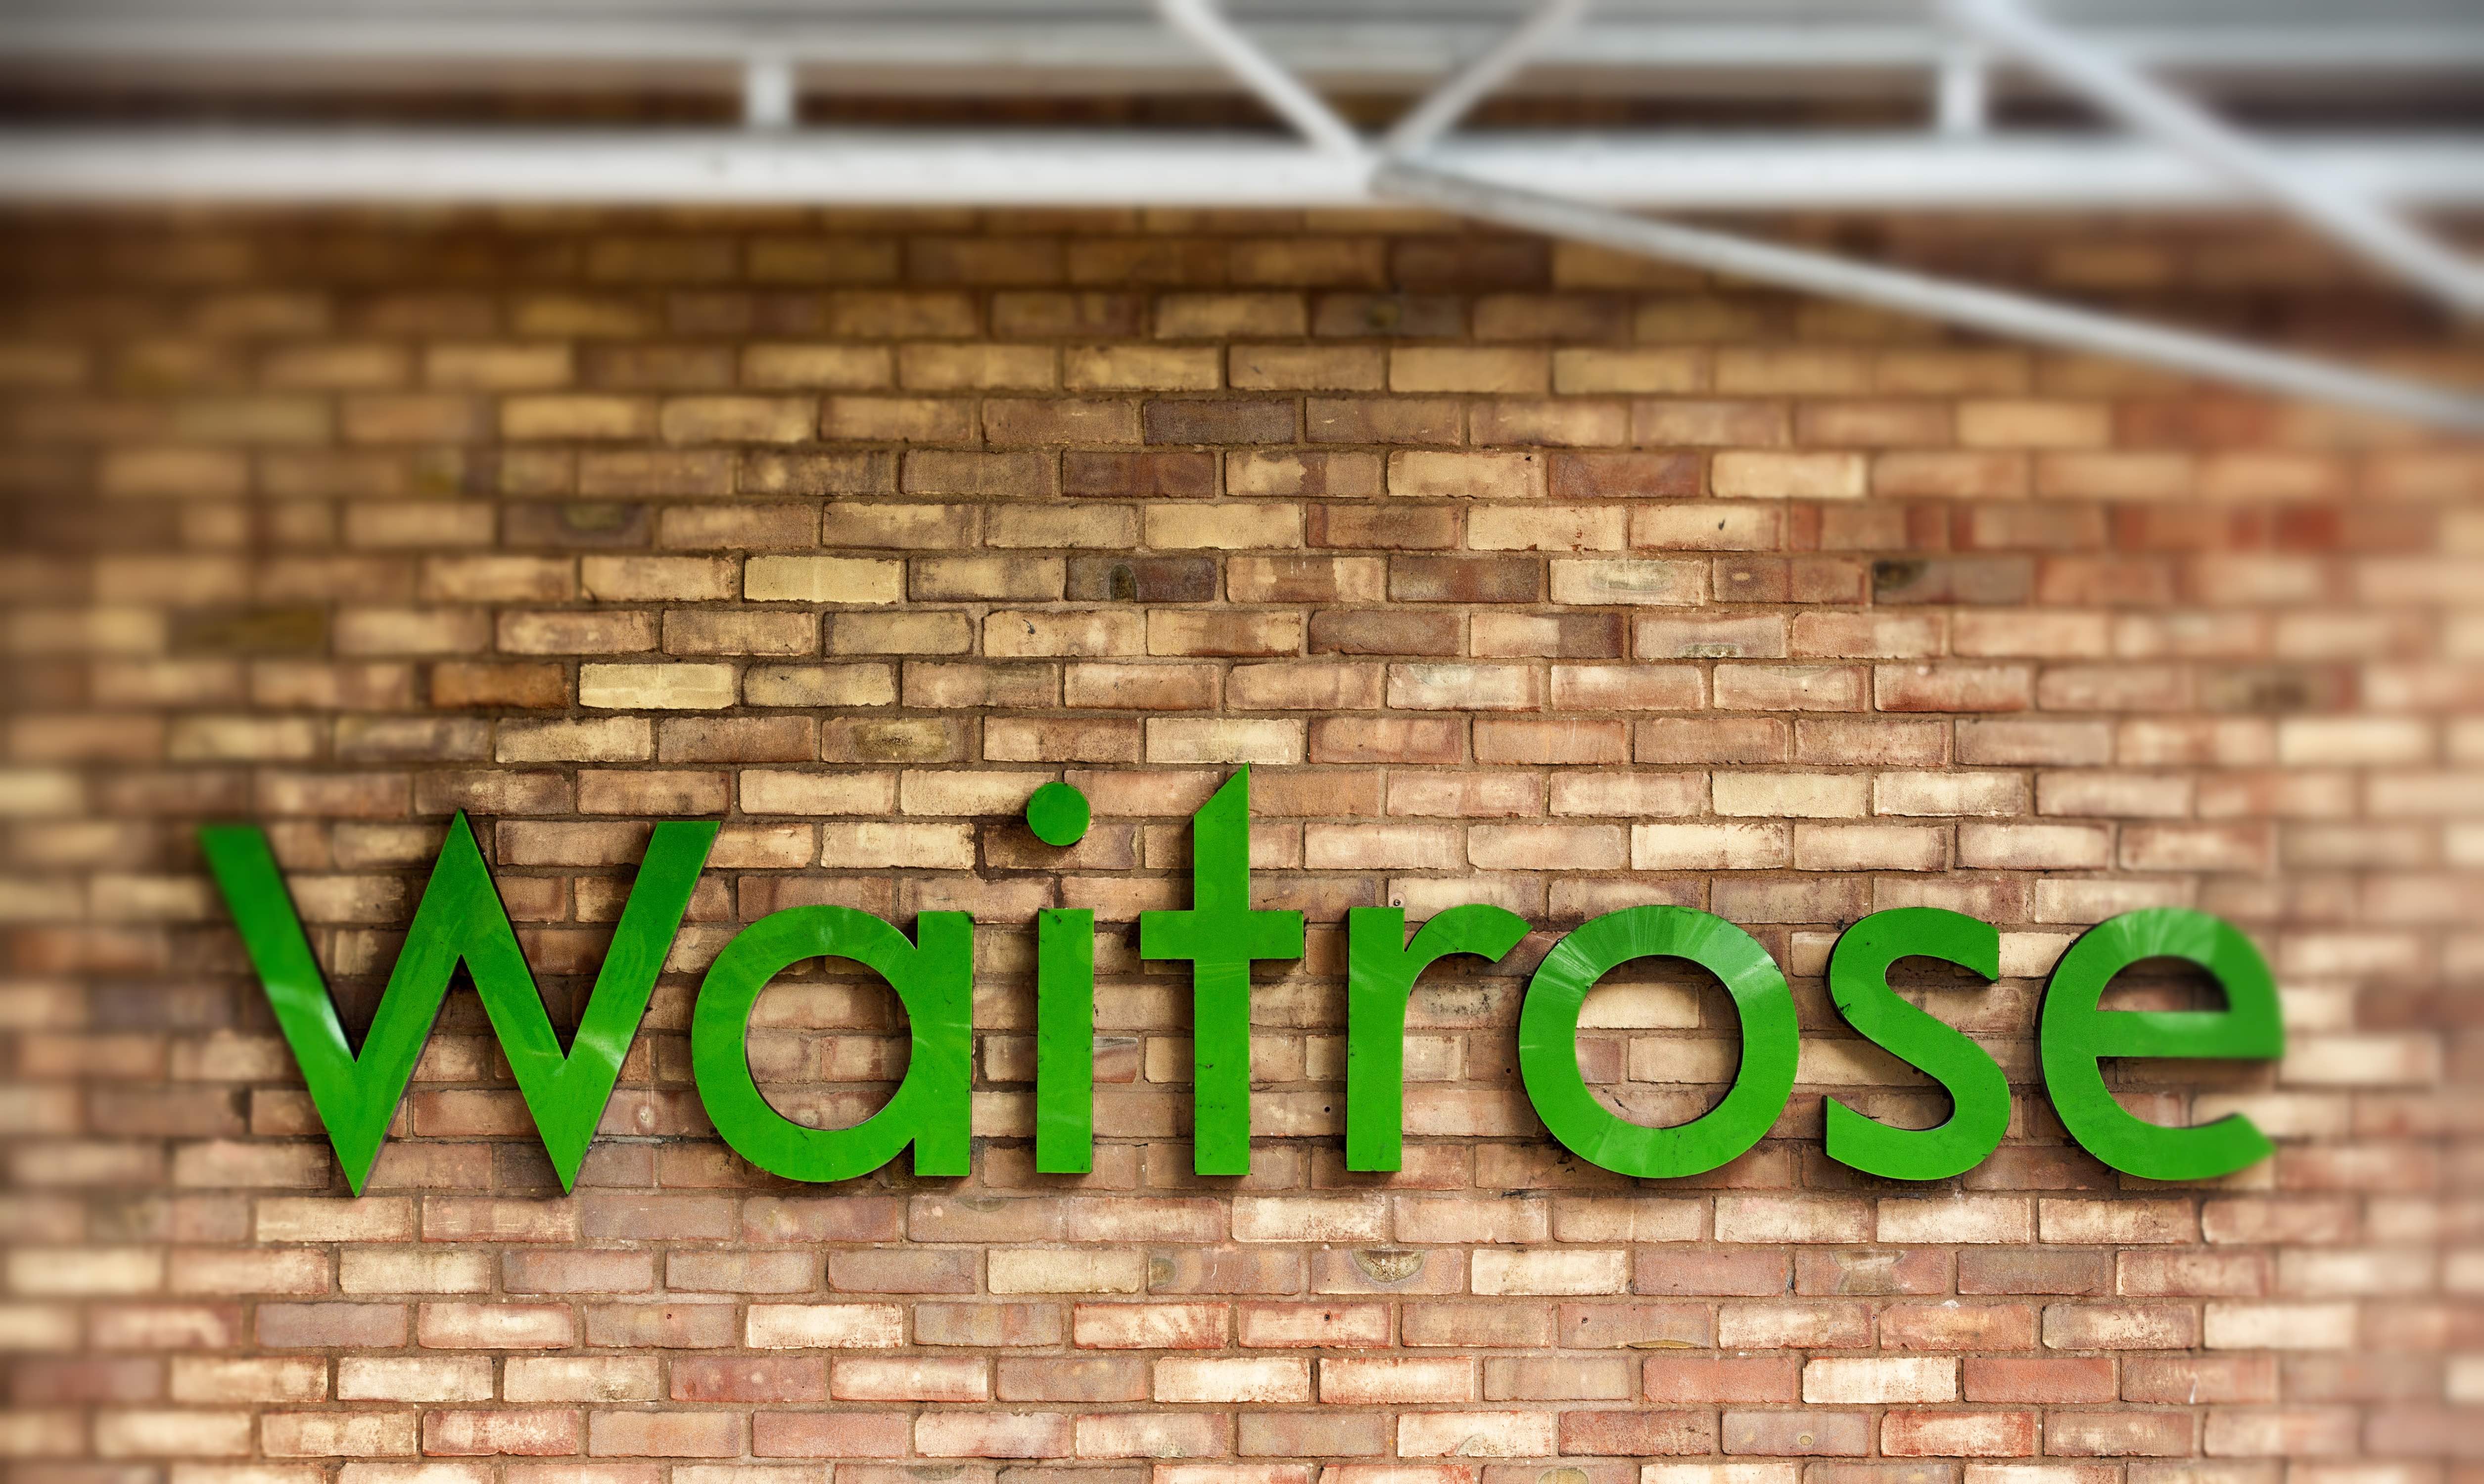 BRISTOL, ENGLAND - NOVEMBER 18: (EDITORS NOTE: This image was created using digital filters) The Waitrose sign is displayed outside a branch of the supermarket on November 18, 2015 in Bristol, England. As the crucial Christmas retail period approaches, all the major supermarkets are becoming increasingly competitive to retain and increase their share of the market. (Photo by Matt Cardy/Getty Images)